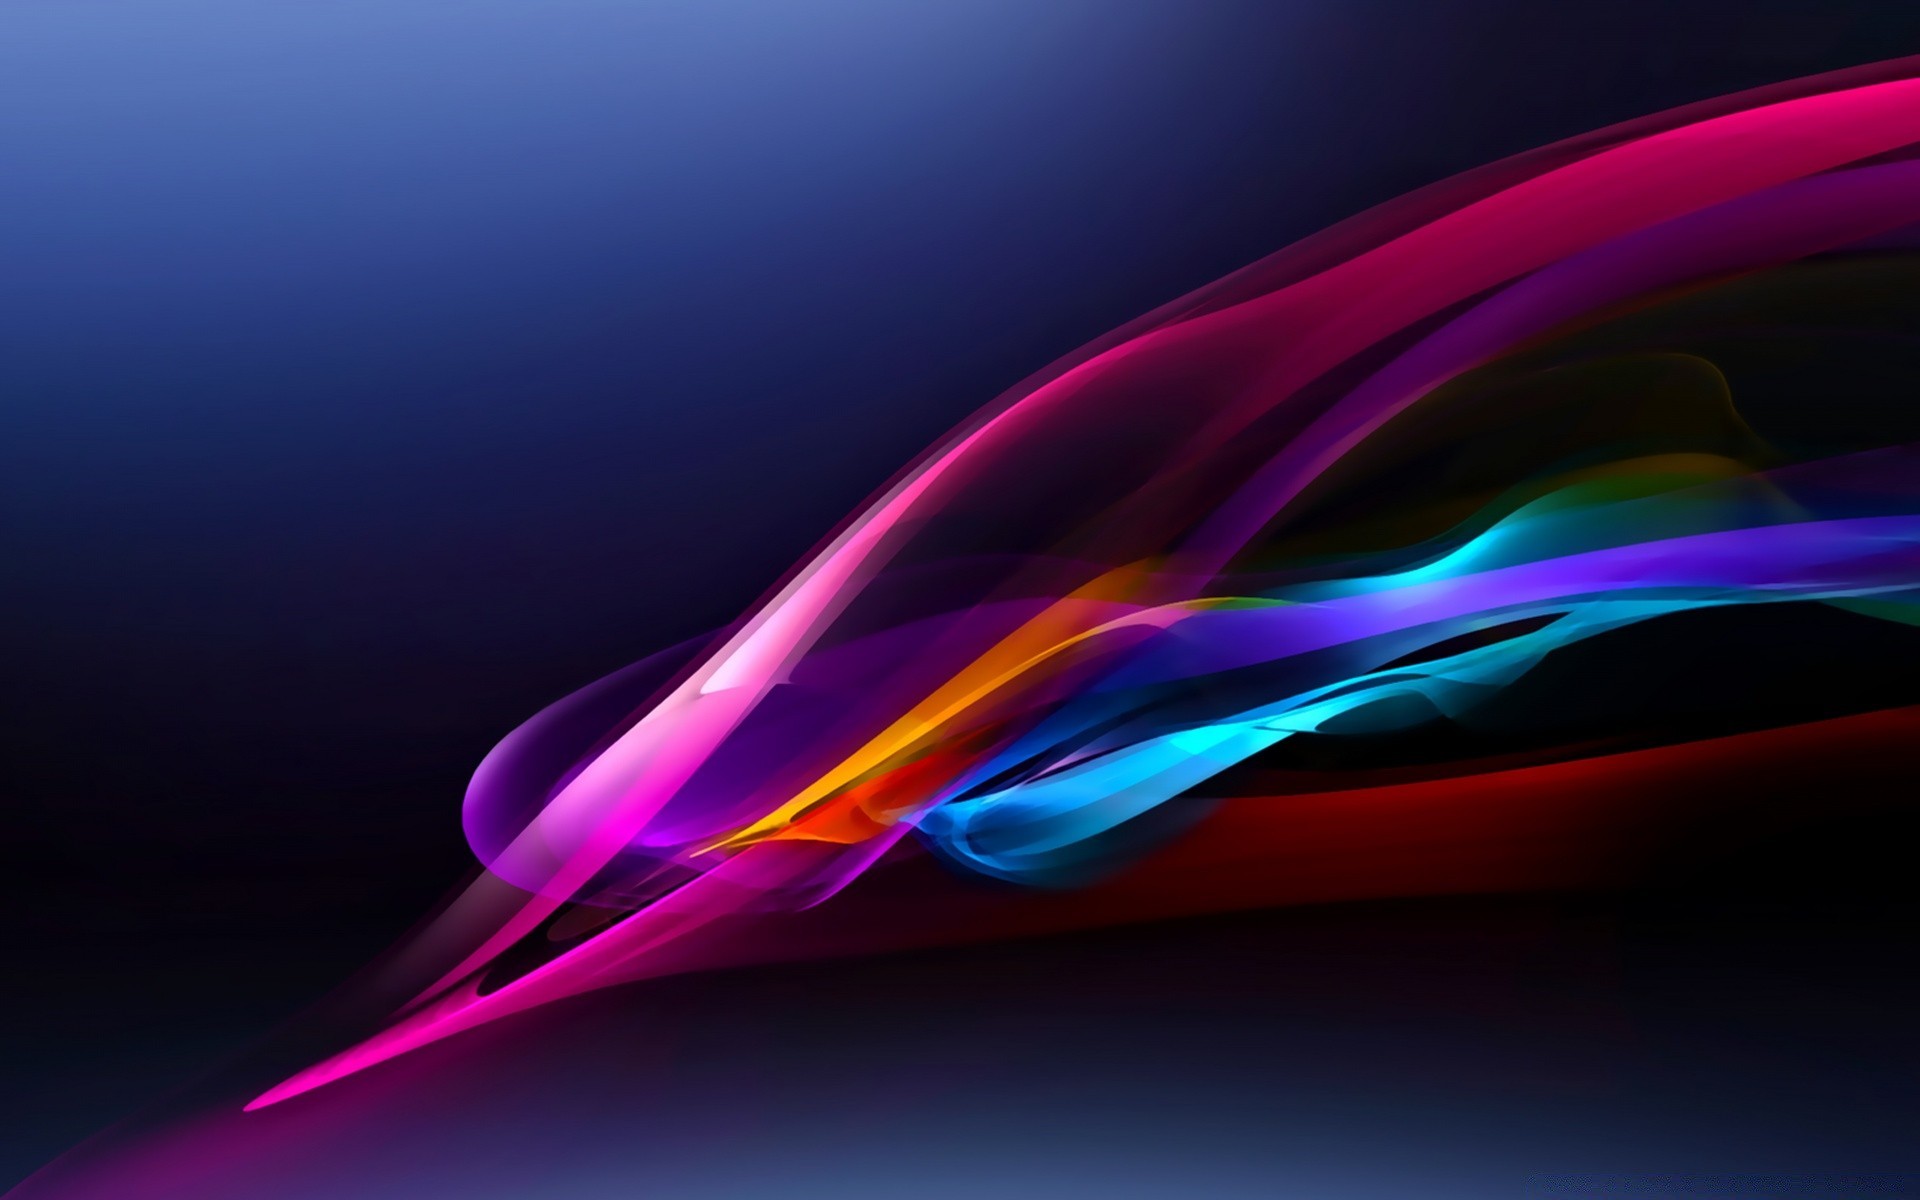 digital technology blur art illustration abstract futuristic dynamic motion graphic wallpaper shape curve artistic creativity color smooth design